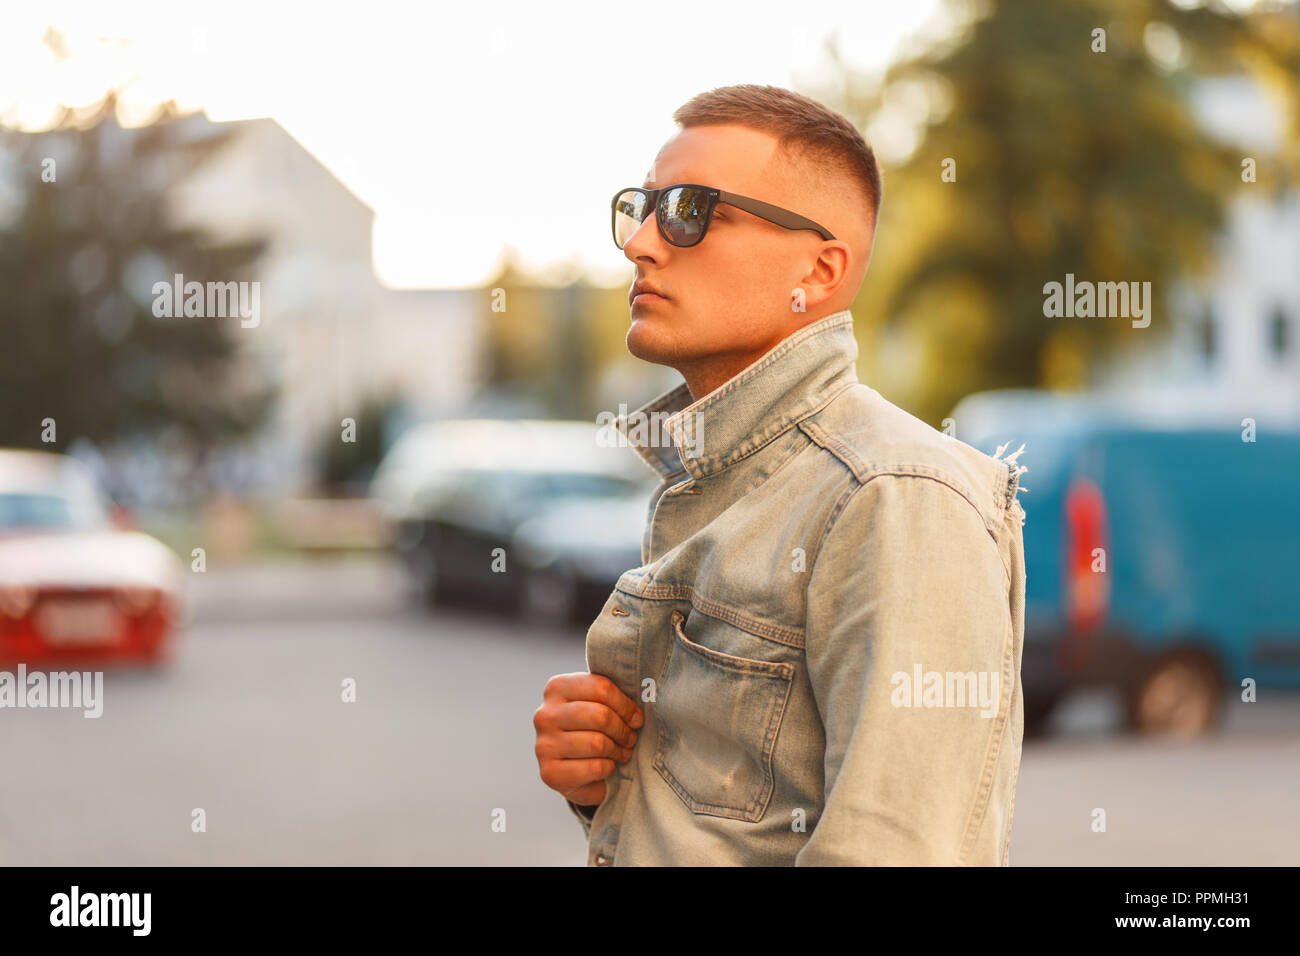 Fashionable handsome young hipster man with hairstyle in sunglasses with a black T-shirt with a jeans jacket in the street at sunset Stock Photo